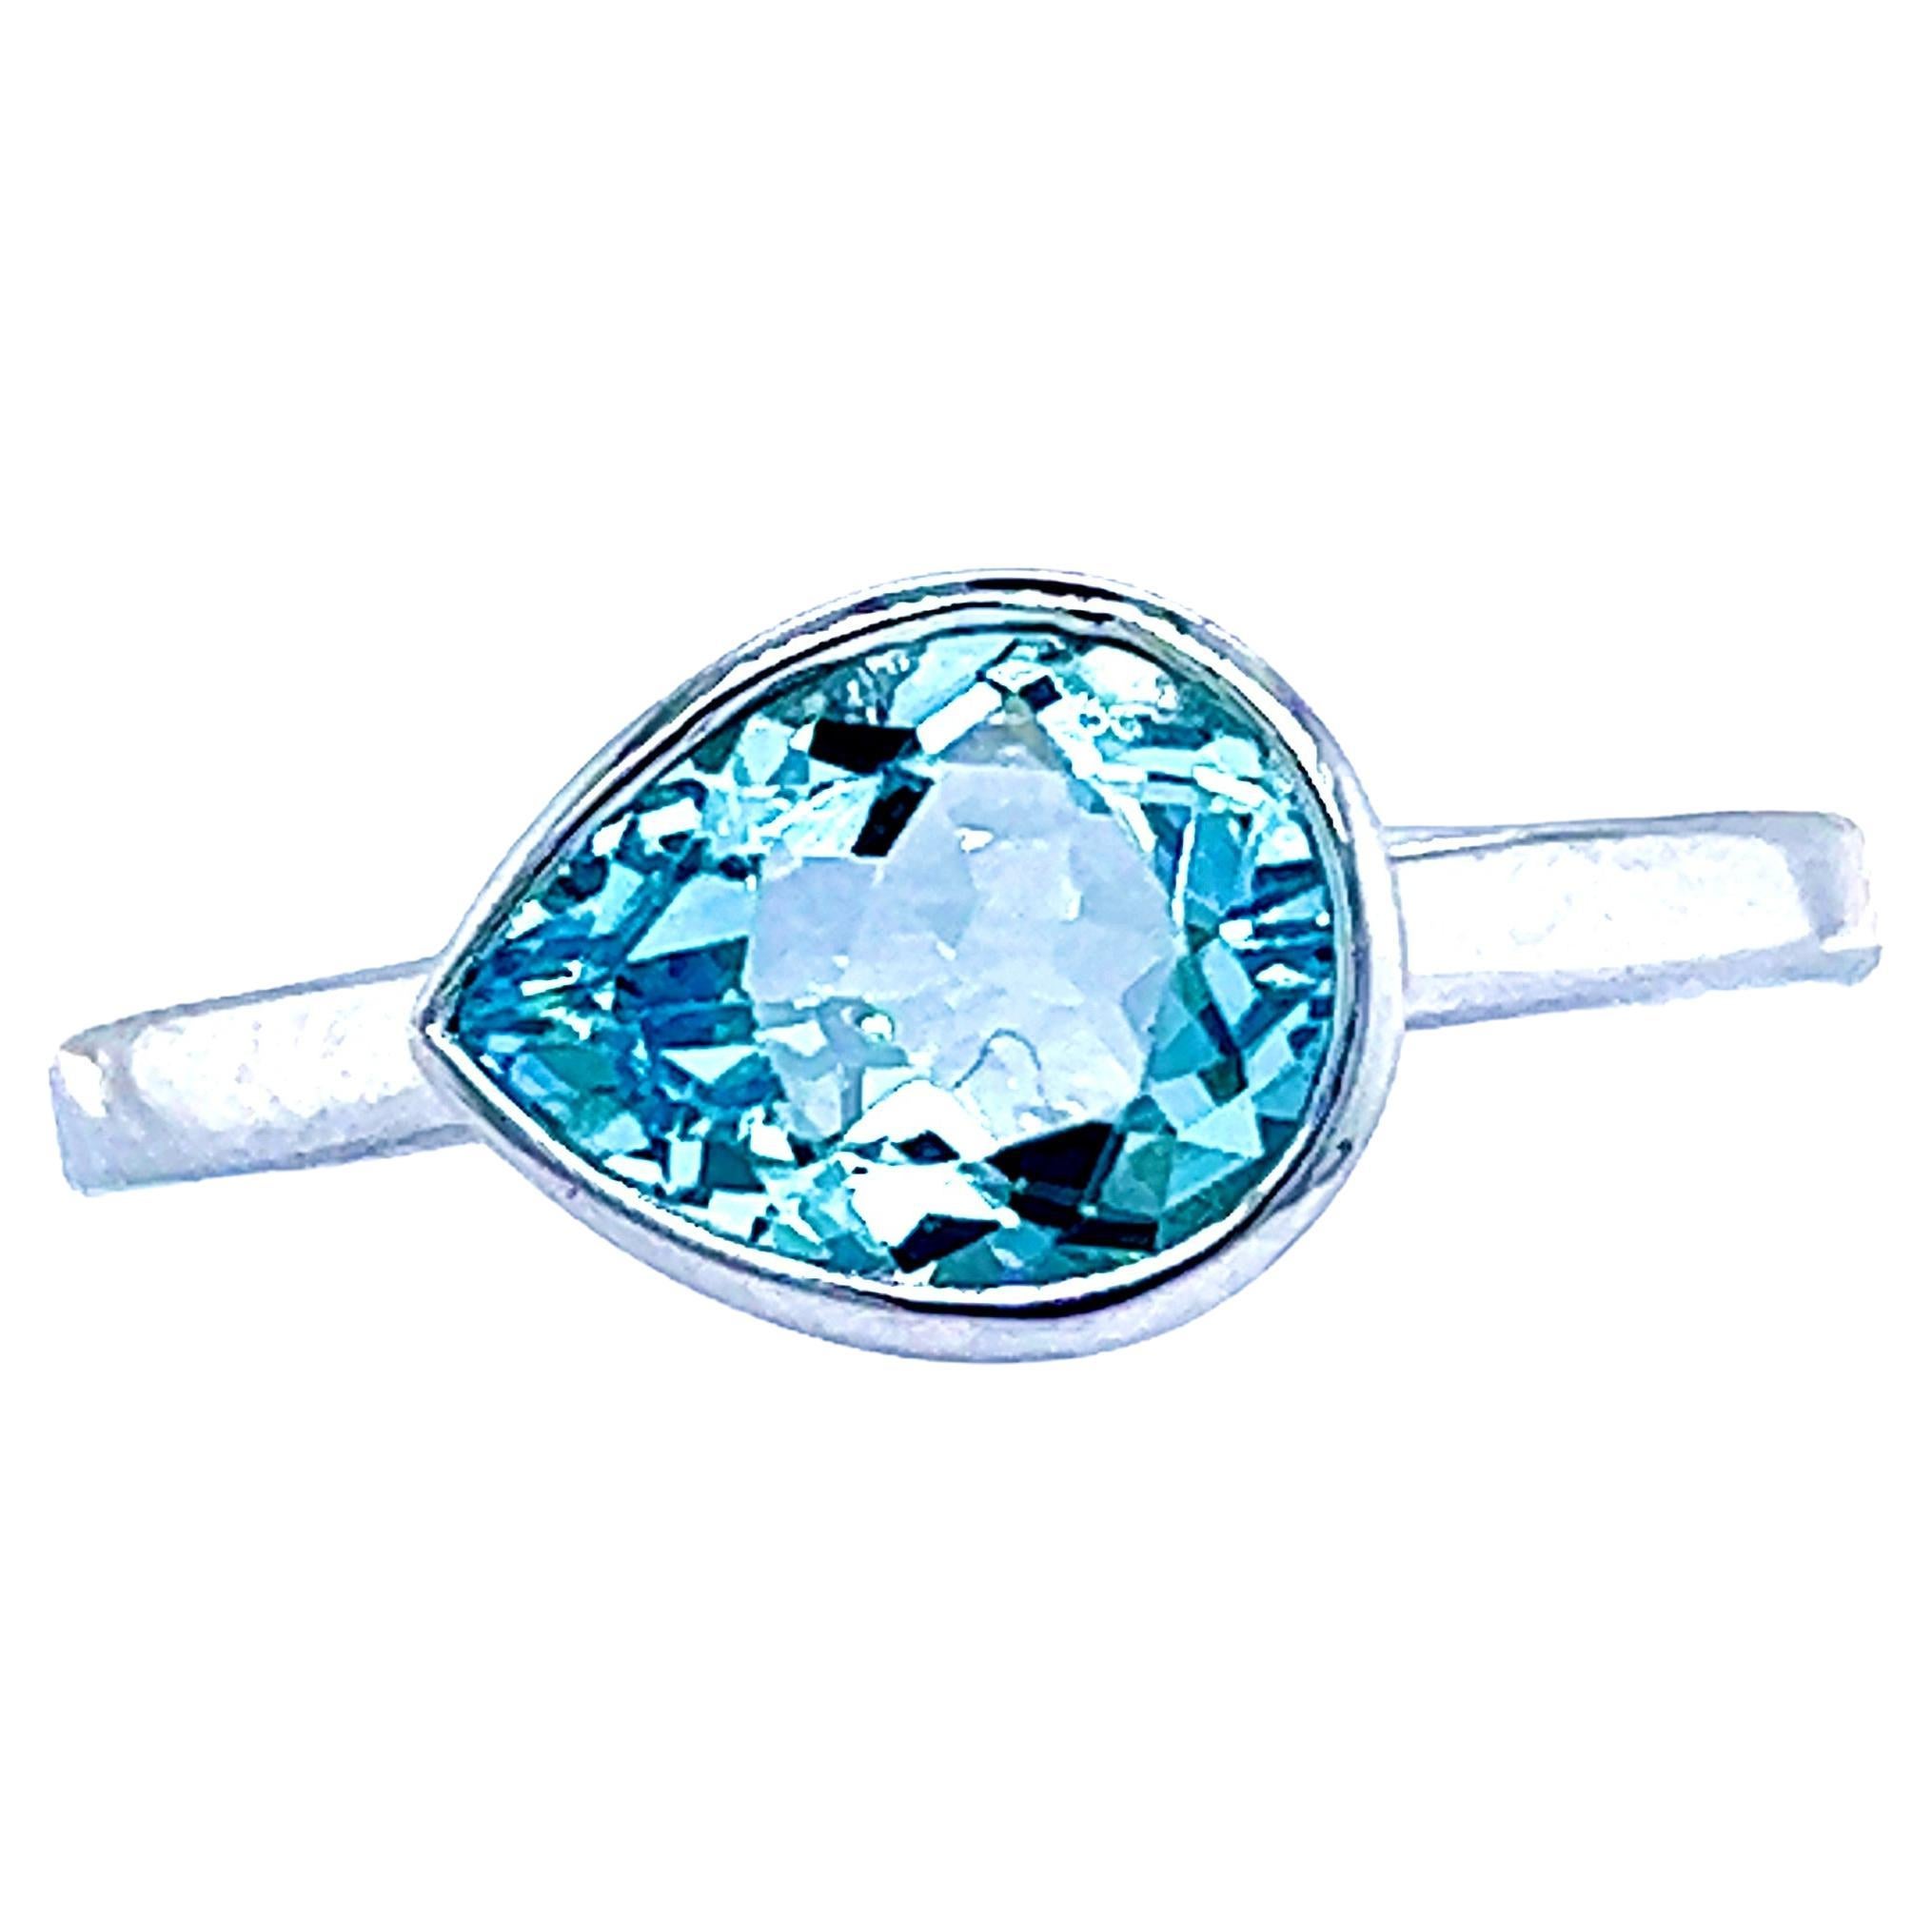 Natural Aquamarine Ring 6.5 14k White Gold 3.21 TCW Certified For Sale ...